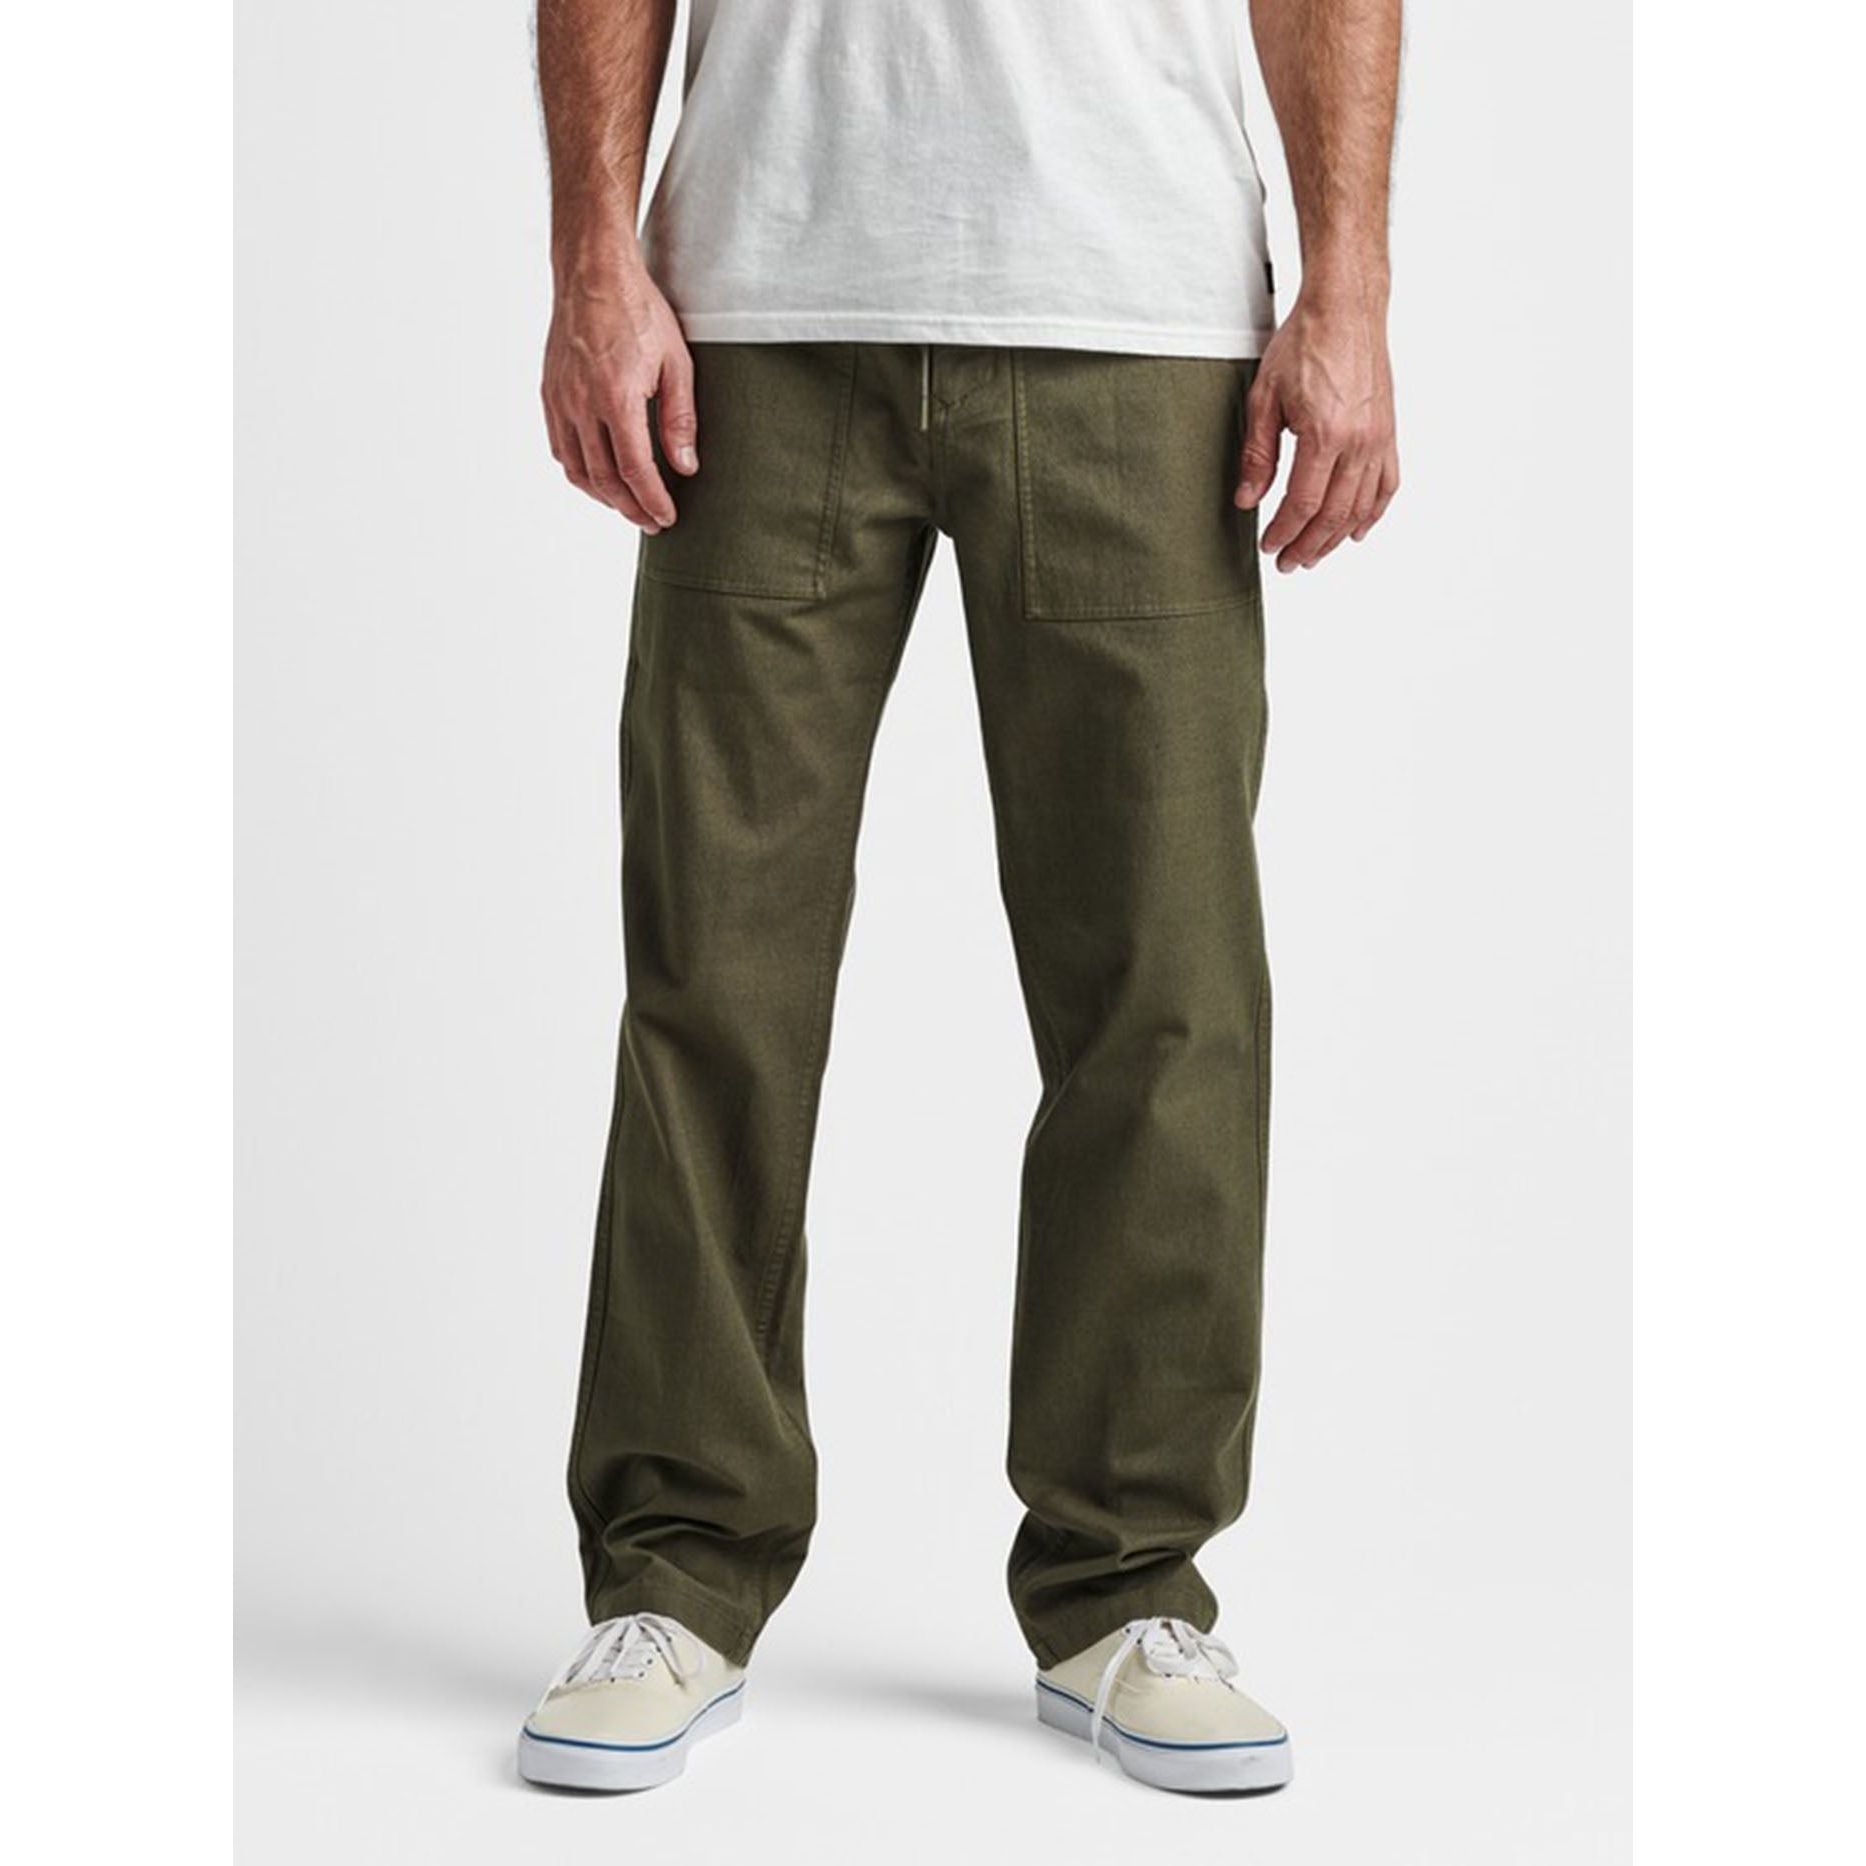 Pantalons Layover Utility pour Hommes||Layover Utility Pant for Men's